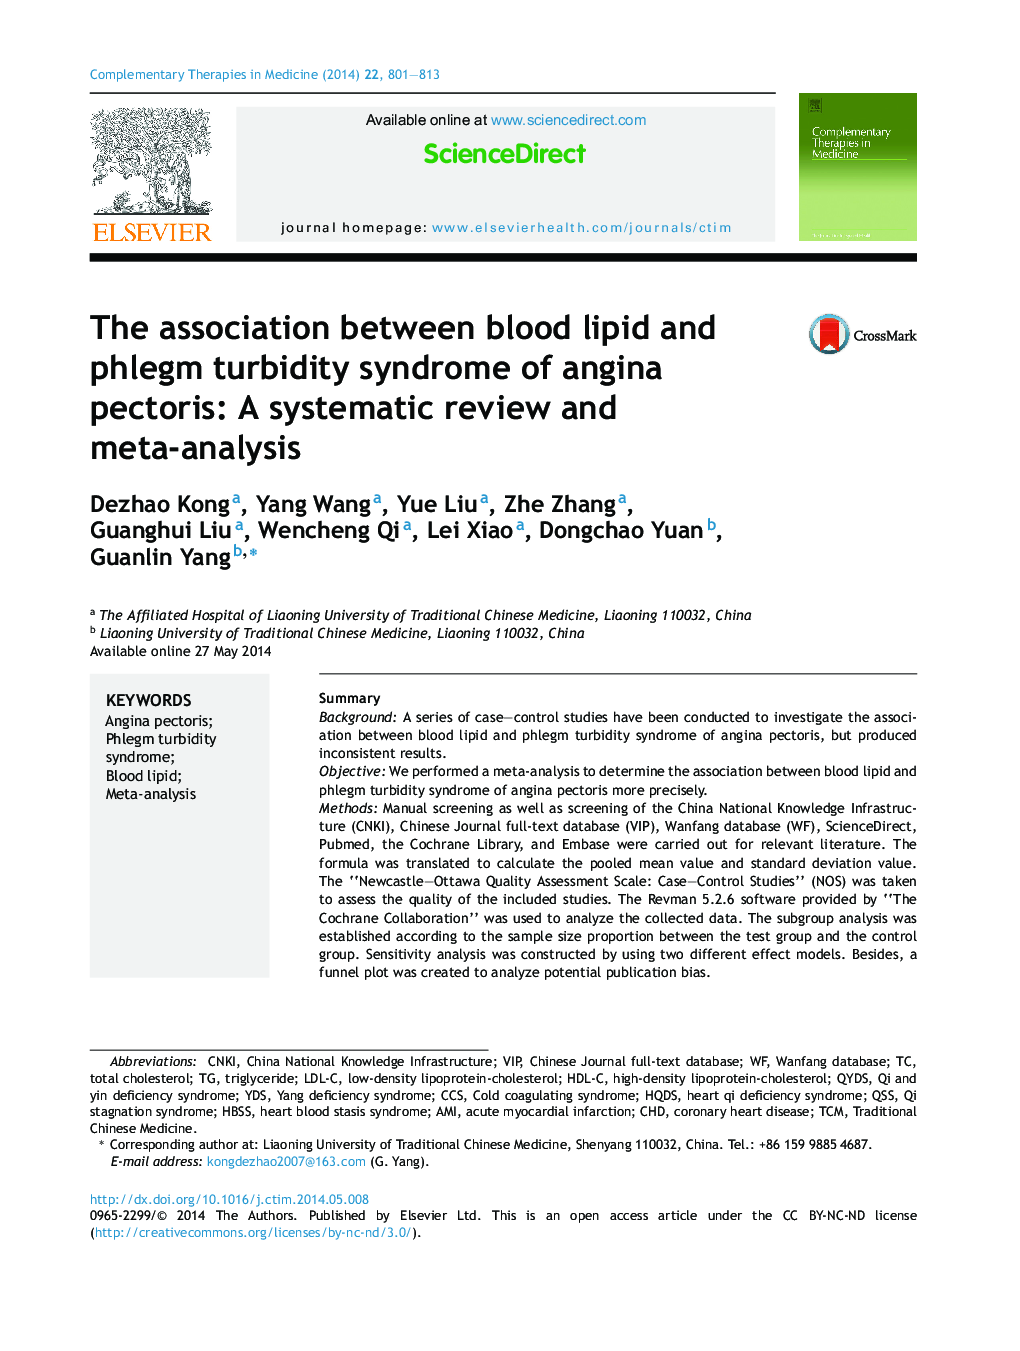 The association between blood lipid and phlegm turbidity syndrome of angina pectoris: A systematic review and meta-analysis